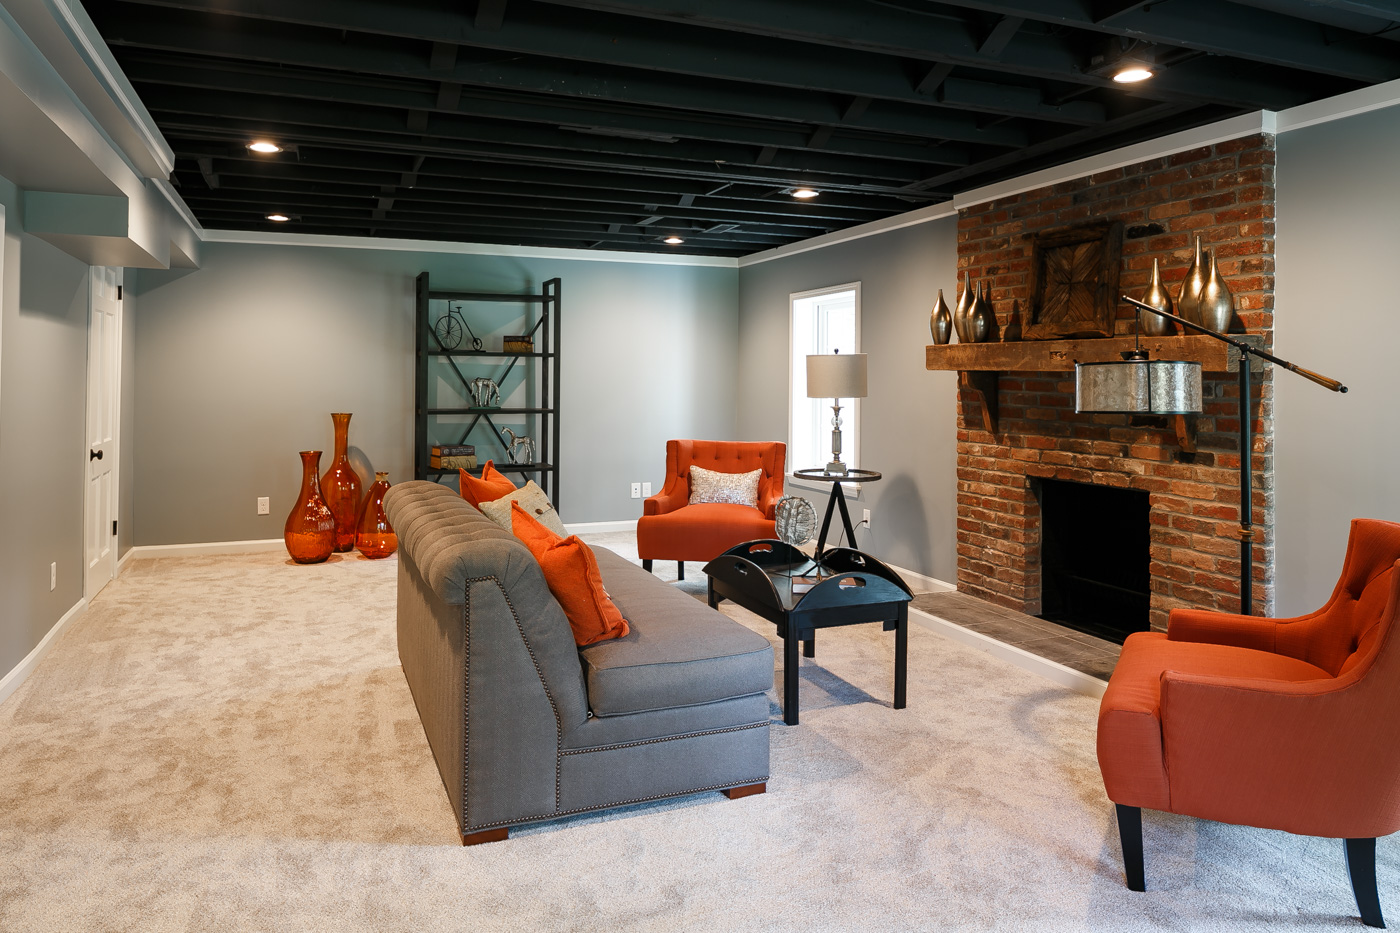 Basement living room with working woodturning fireplace